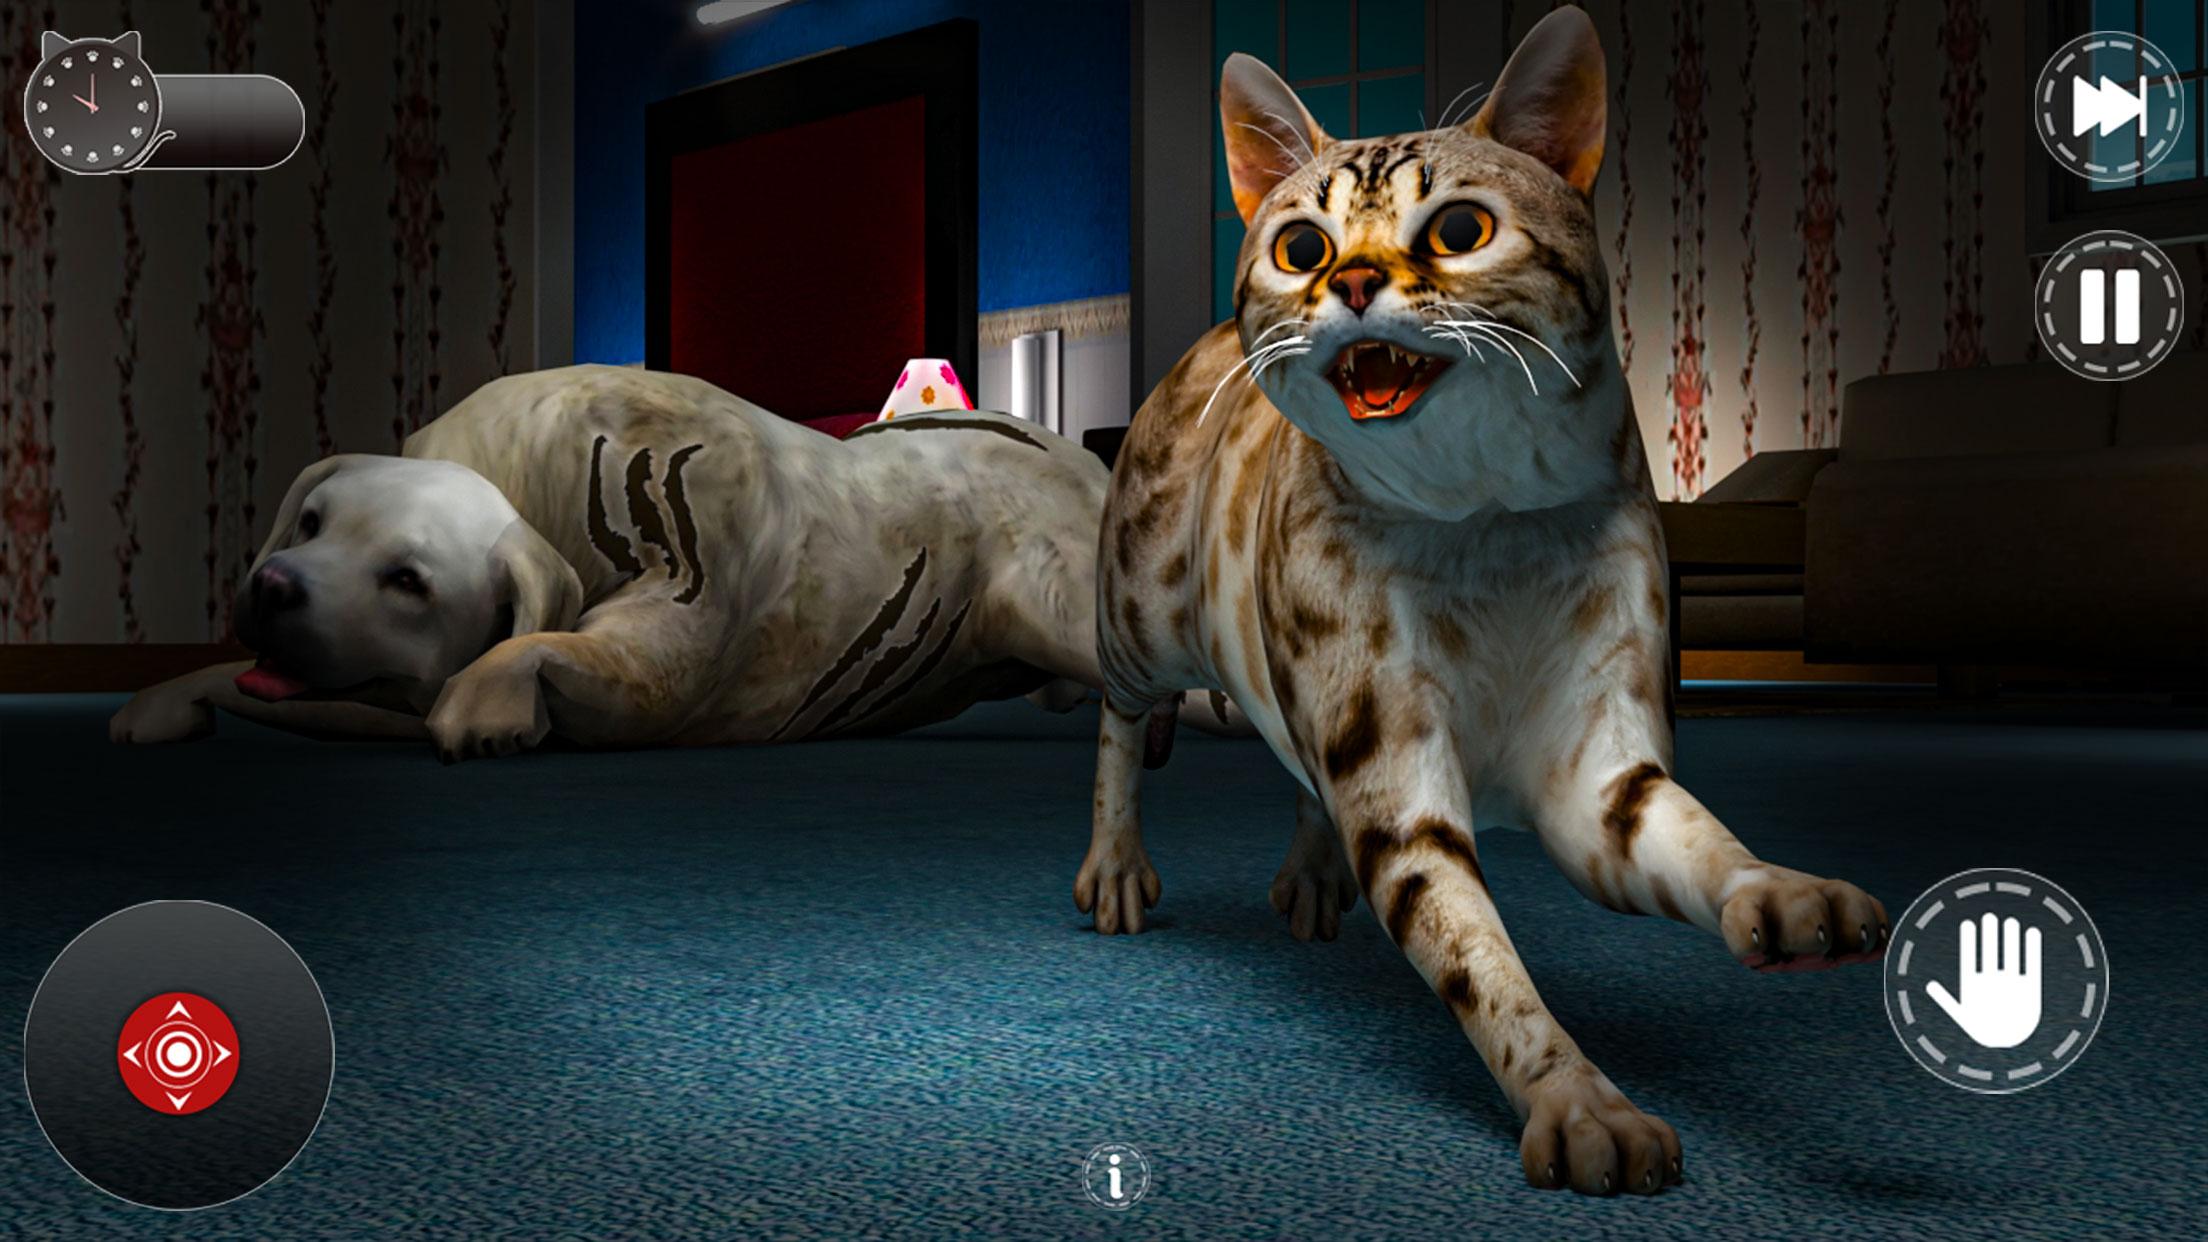 Scary Cartoon Cat Horror Games for Android - APK Download